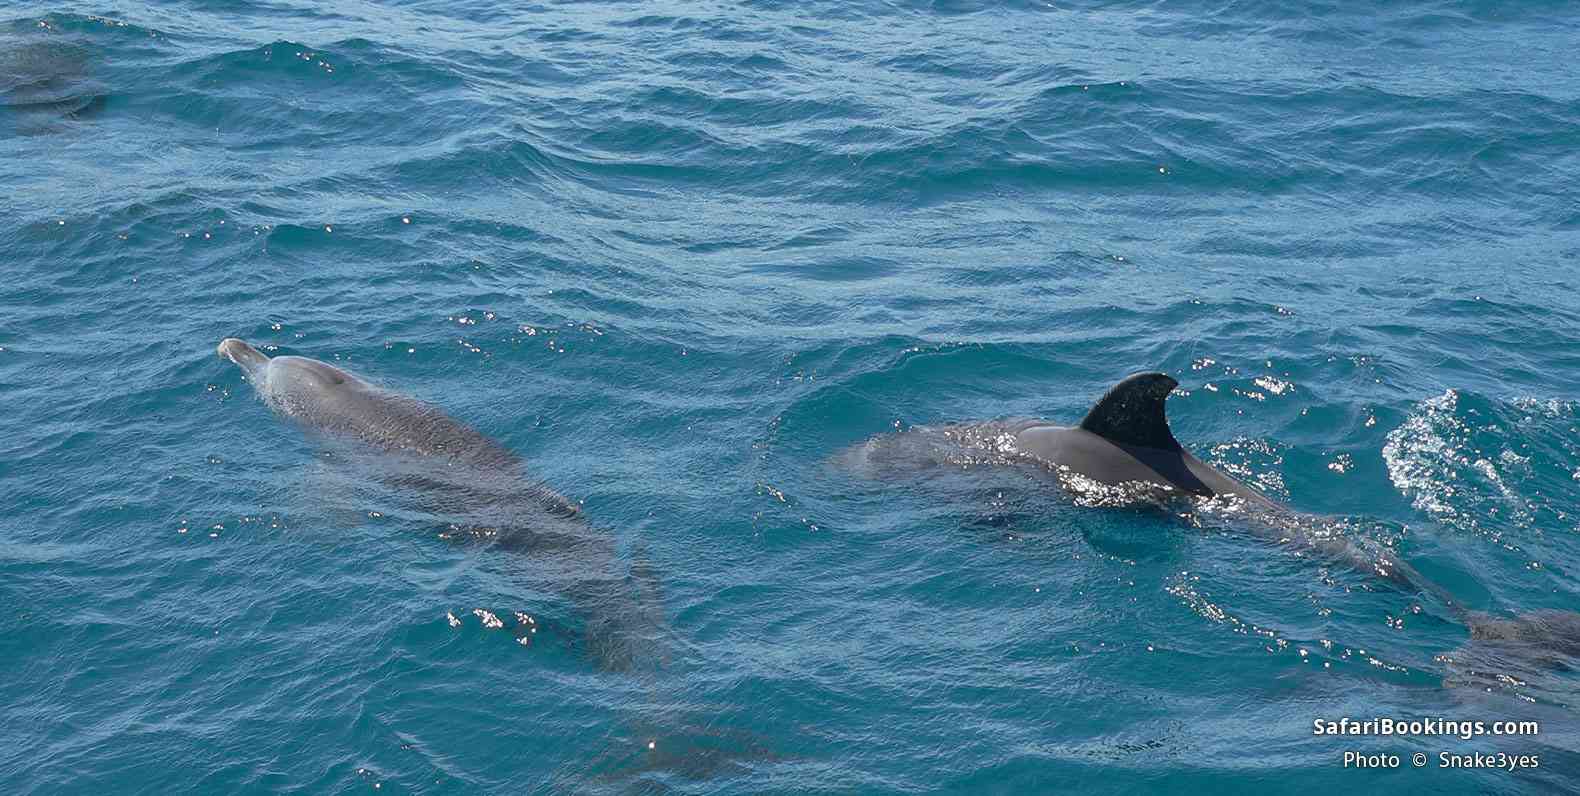 Dolphins seen just off the Kisite-Mpunguti Marine National Park